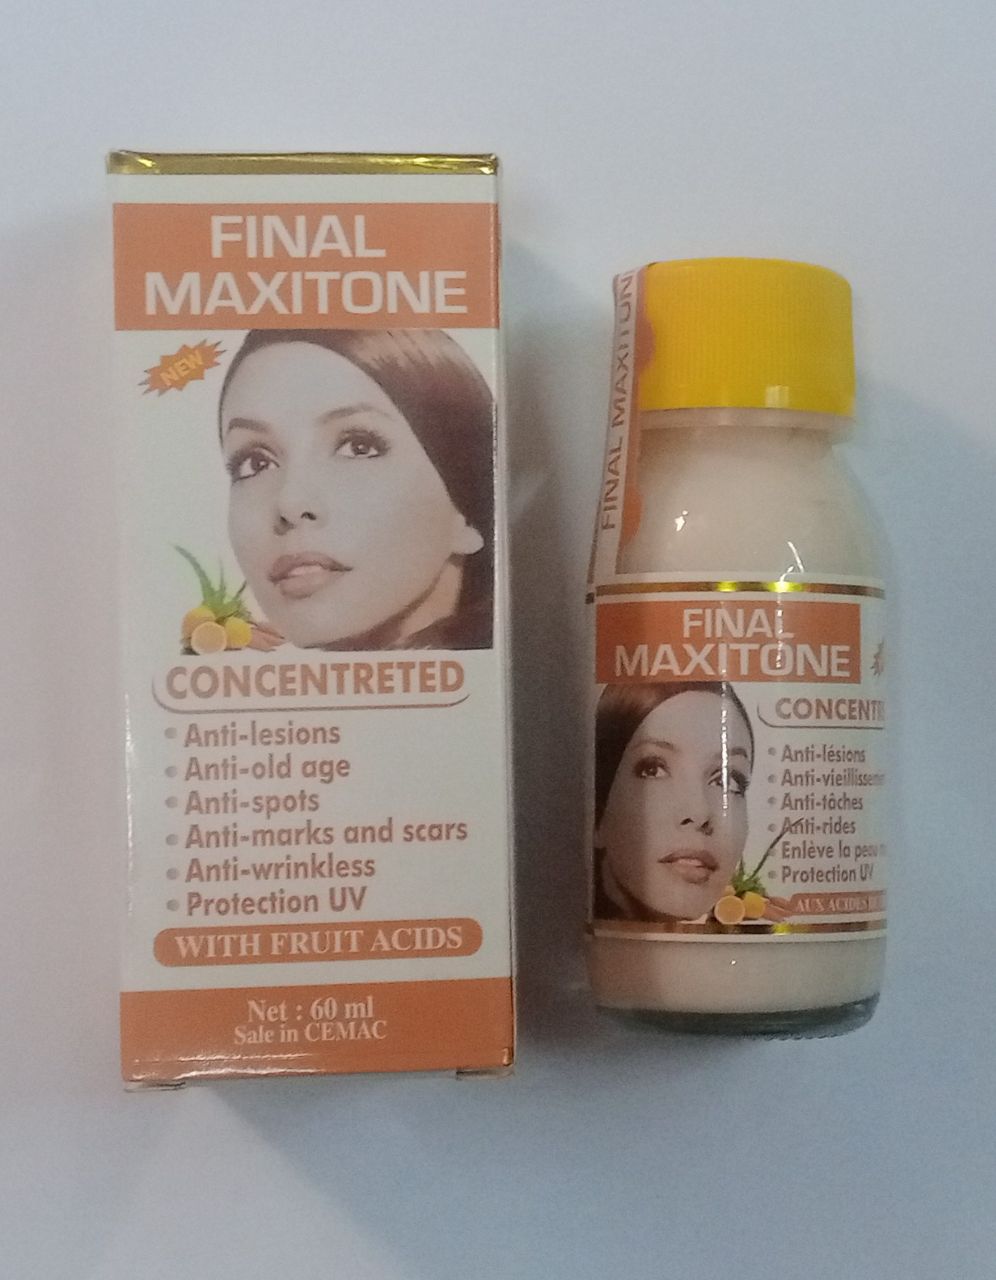 "FINAL MAXITONE" Super Lightening Concentrate With Fruit Acids